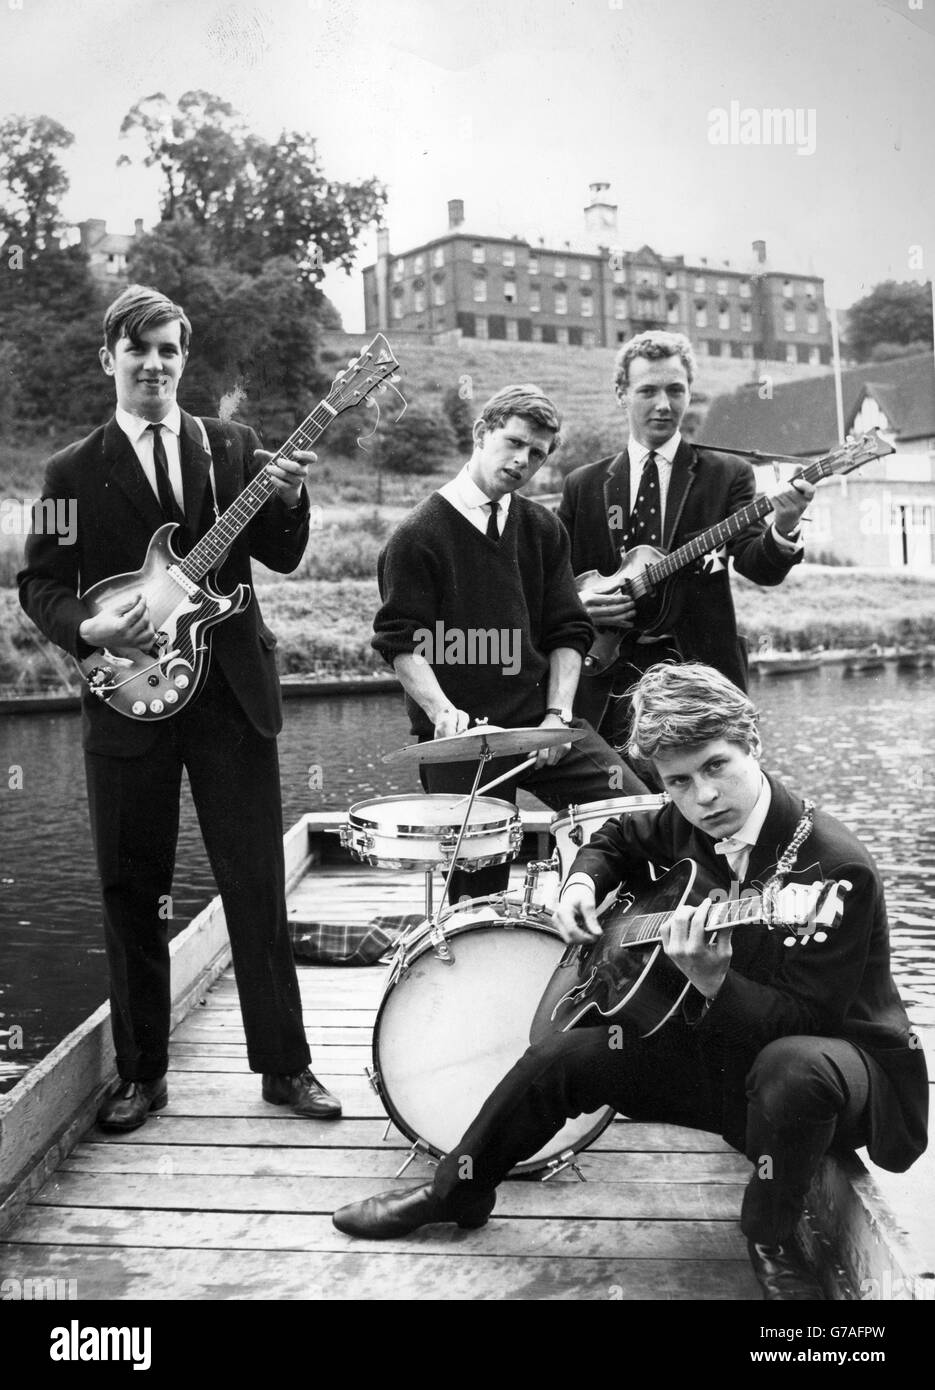 A band made up of pupils from Shrewsbury School practice on the River Severn. In addition to events at their school, they have also performed for local old-age pensioners. They are Richard J Willing-Denton (lead guitar), Charles Haselwood (drums), Giles Halfhead (guitar) and Mike Hewetson (bass guitar). Stock Photo